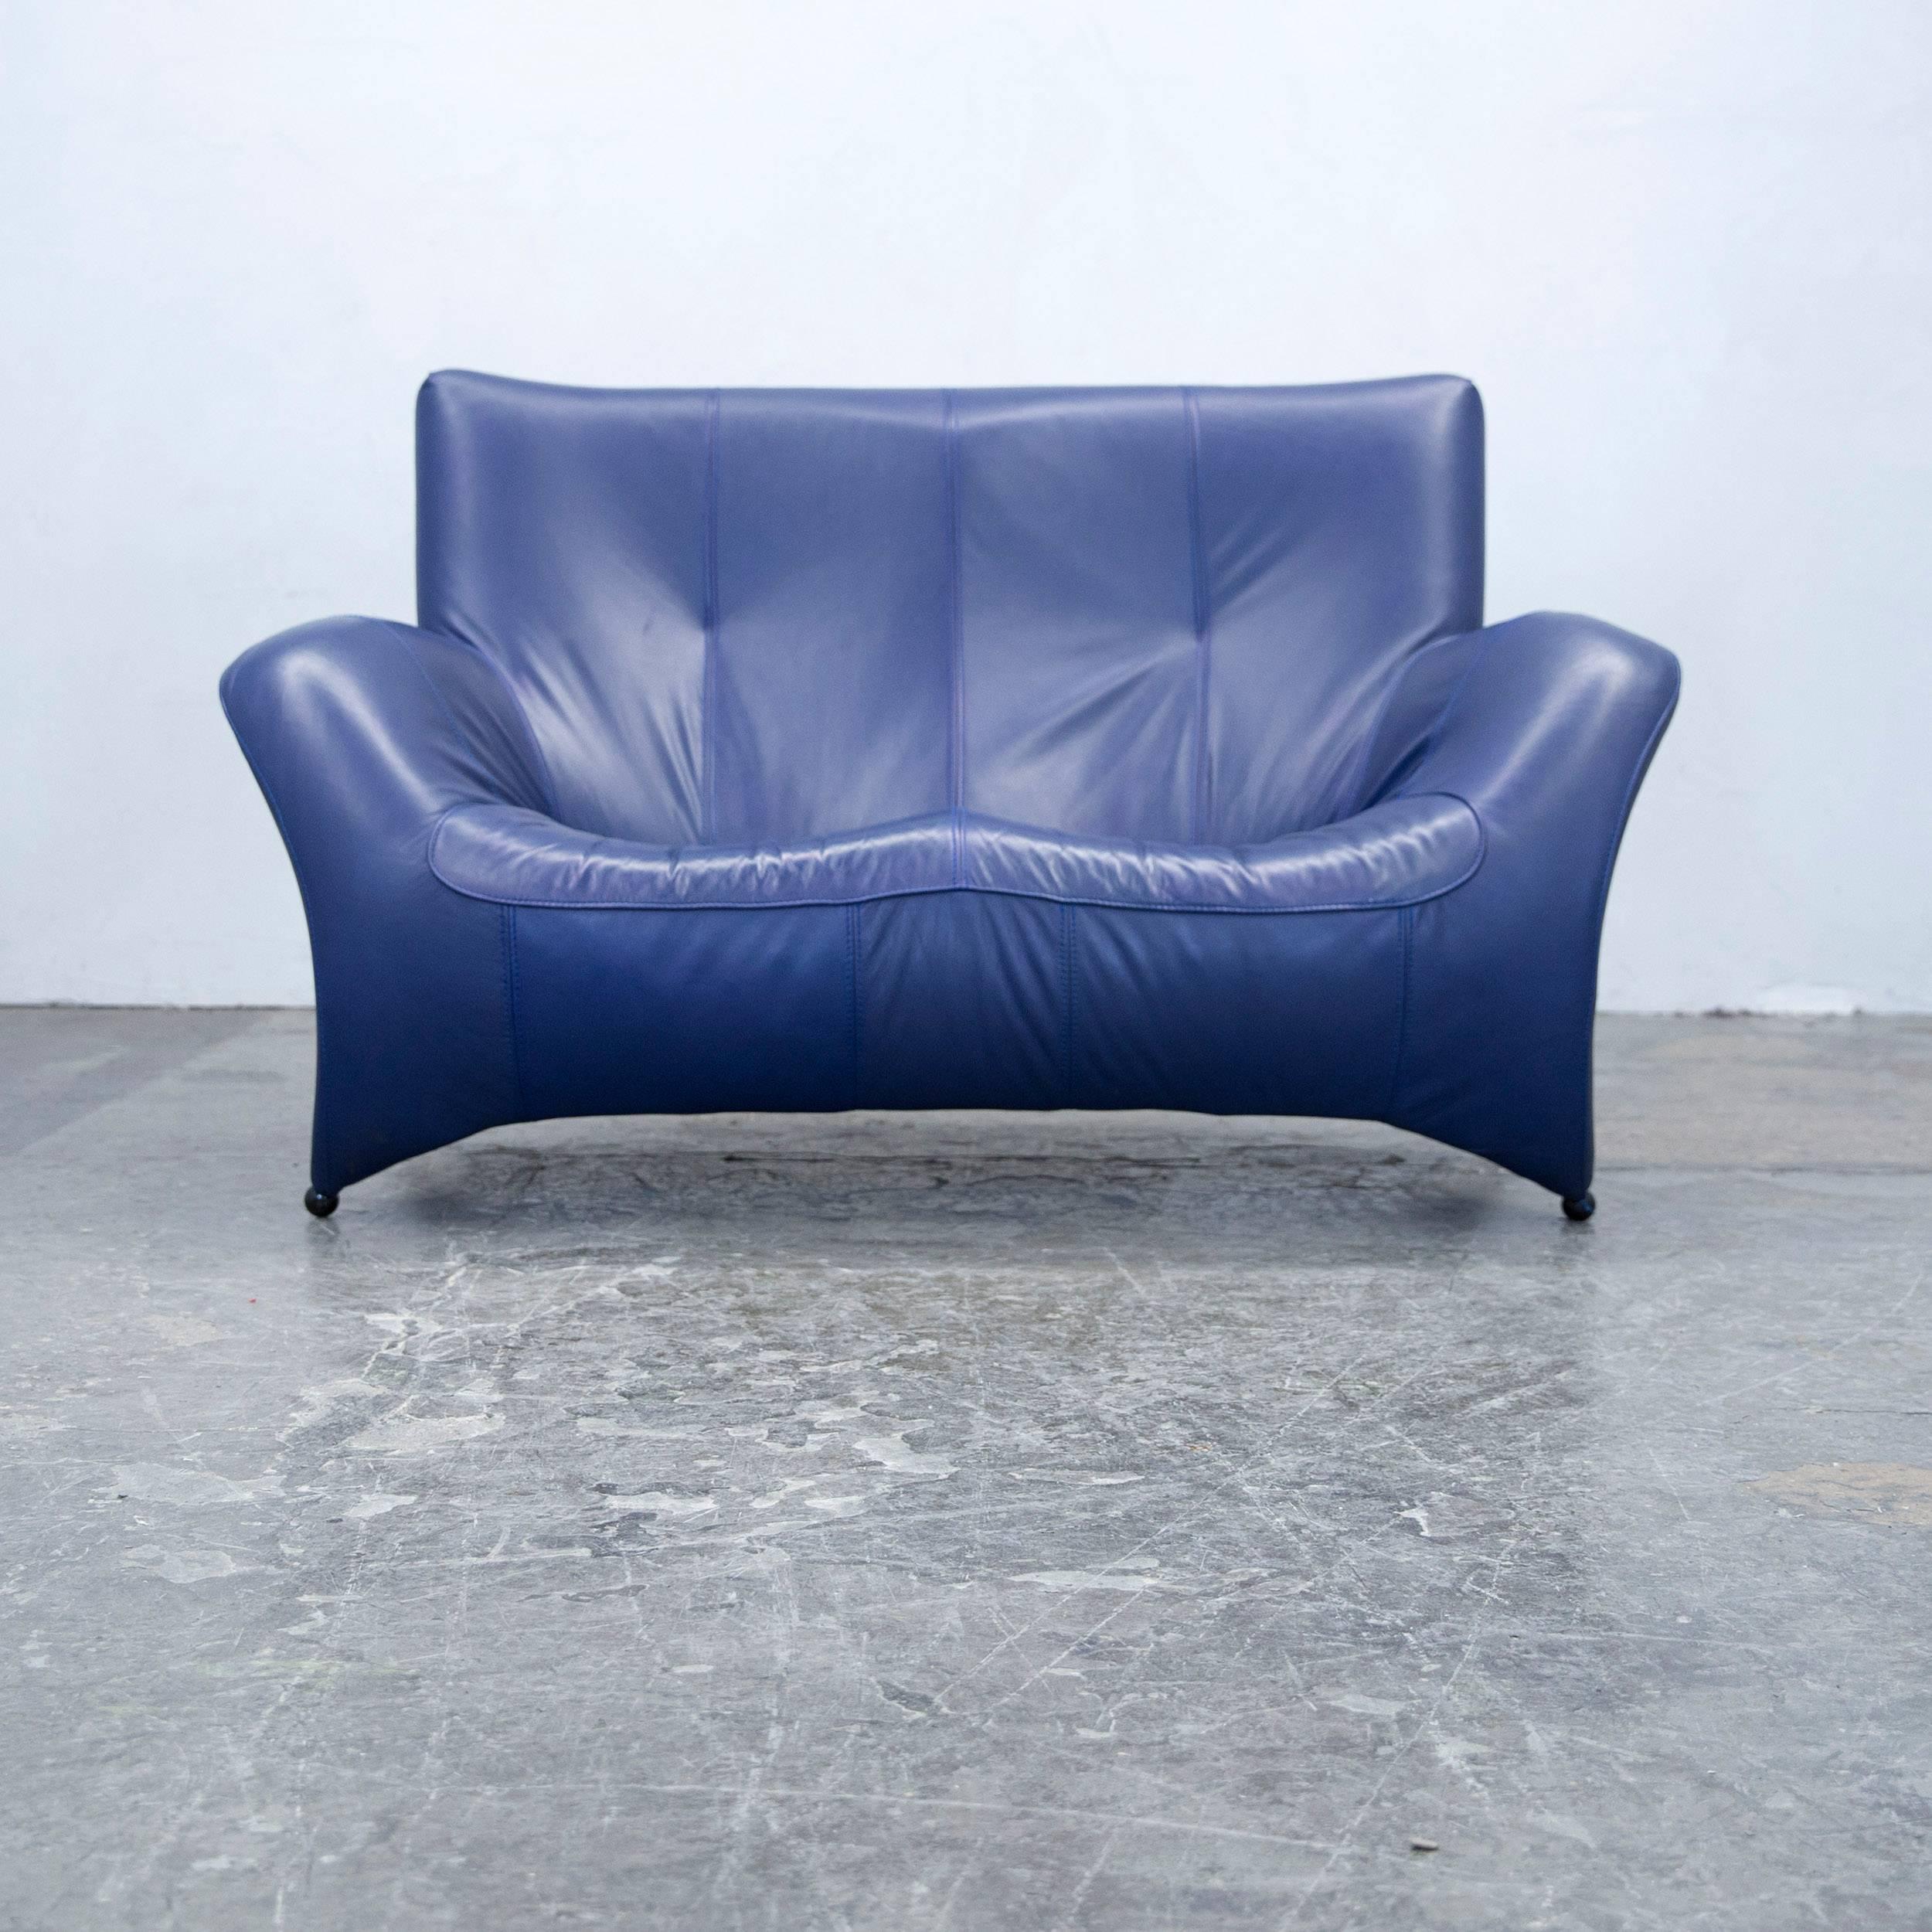 Designer Sofa Leather Blue Two-Seat Couch Modern 5